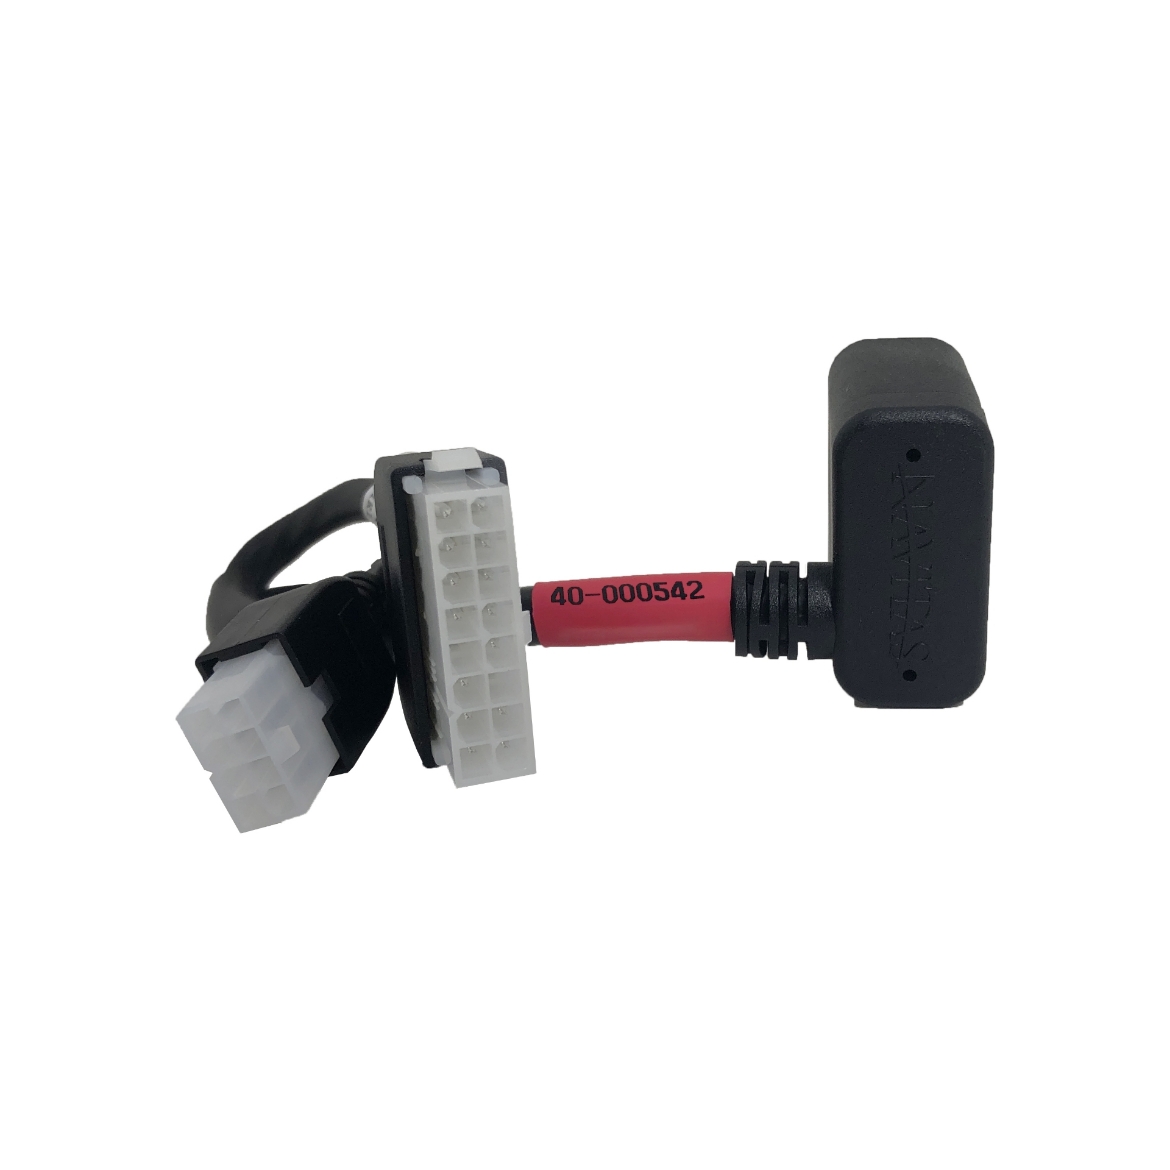 Picture of NAVITAS TSX HARNESS FOR CLUB CAR 1510-1515 (IQ)